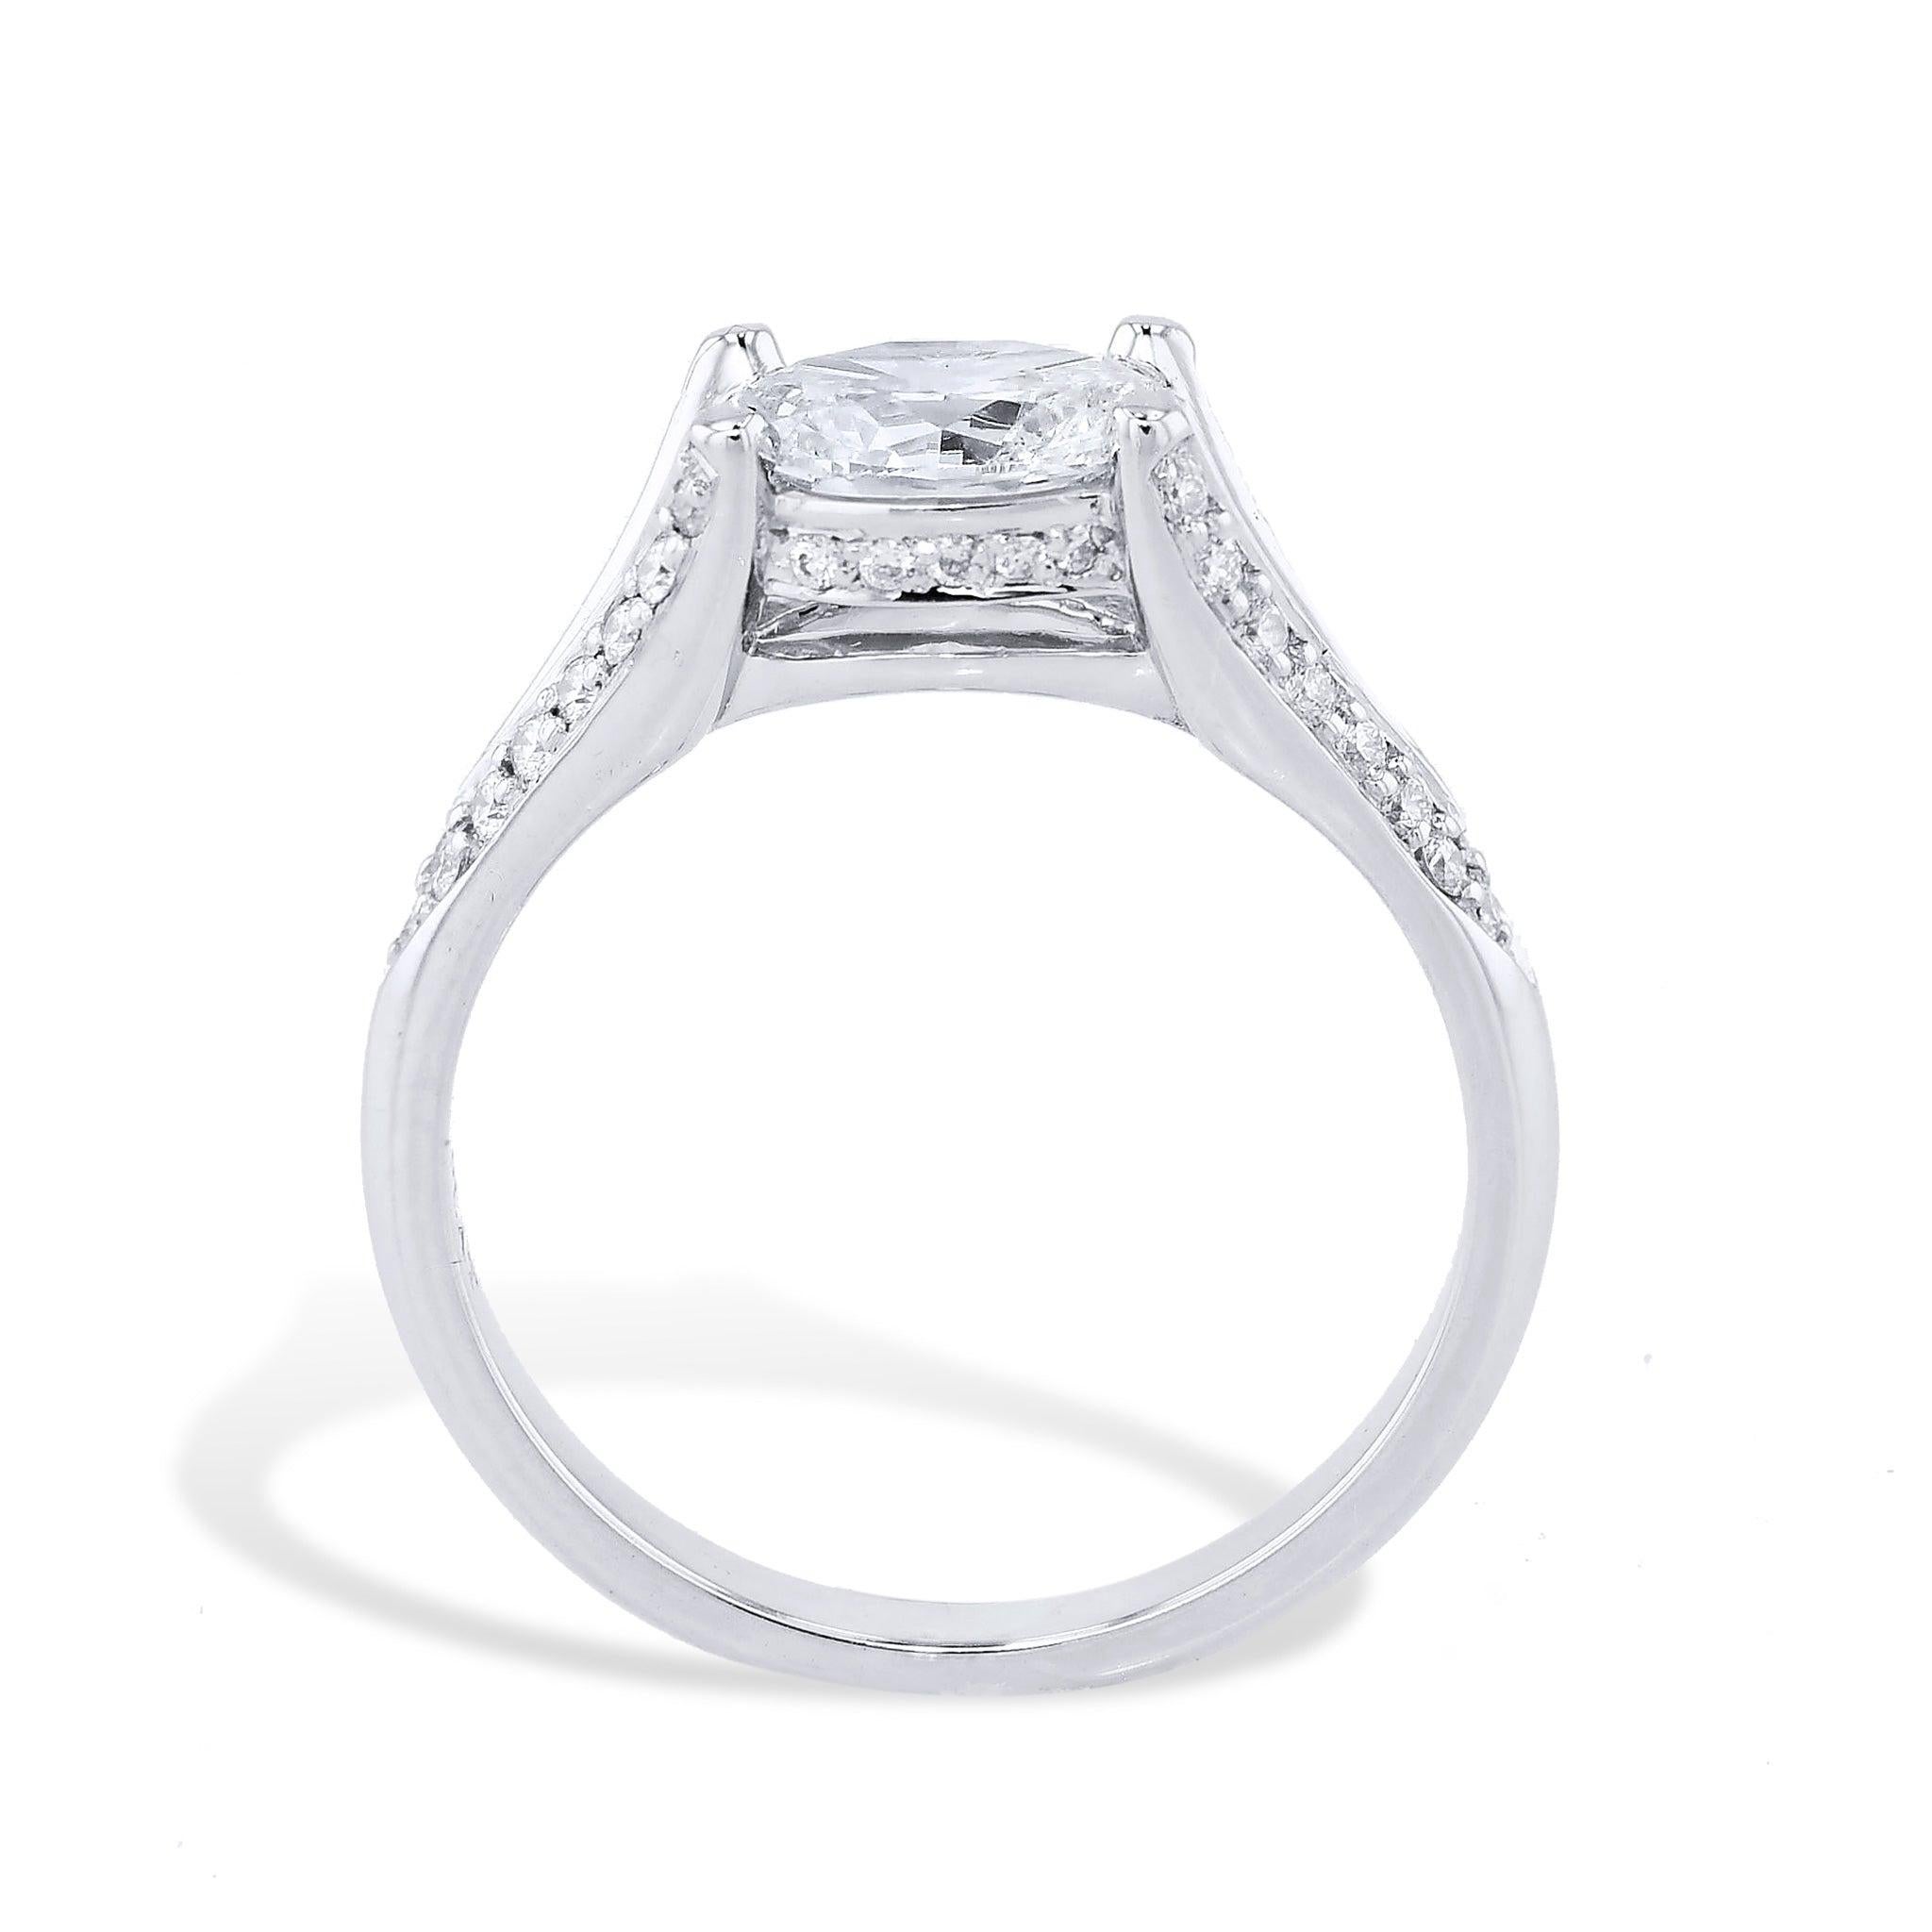 
This stunning Oval Diamond Platinum Pave Engagement Ring features an Oval G.I.A. certified center diamond, complemented by 40 pieces of Pave diamonds on a split shank design, all handmade by the H&H Collection.

Oval Diamond Platinum Pave